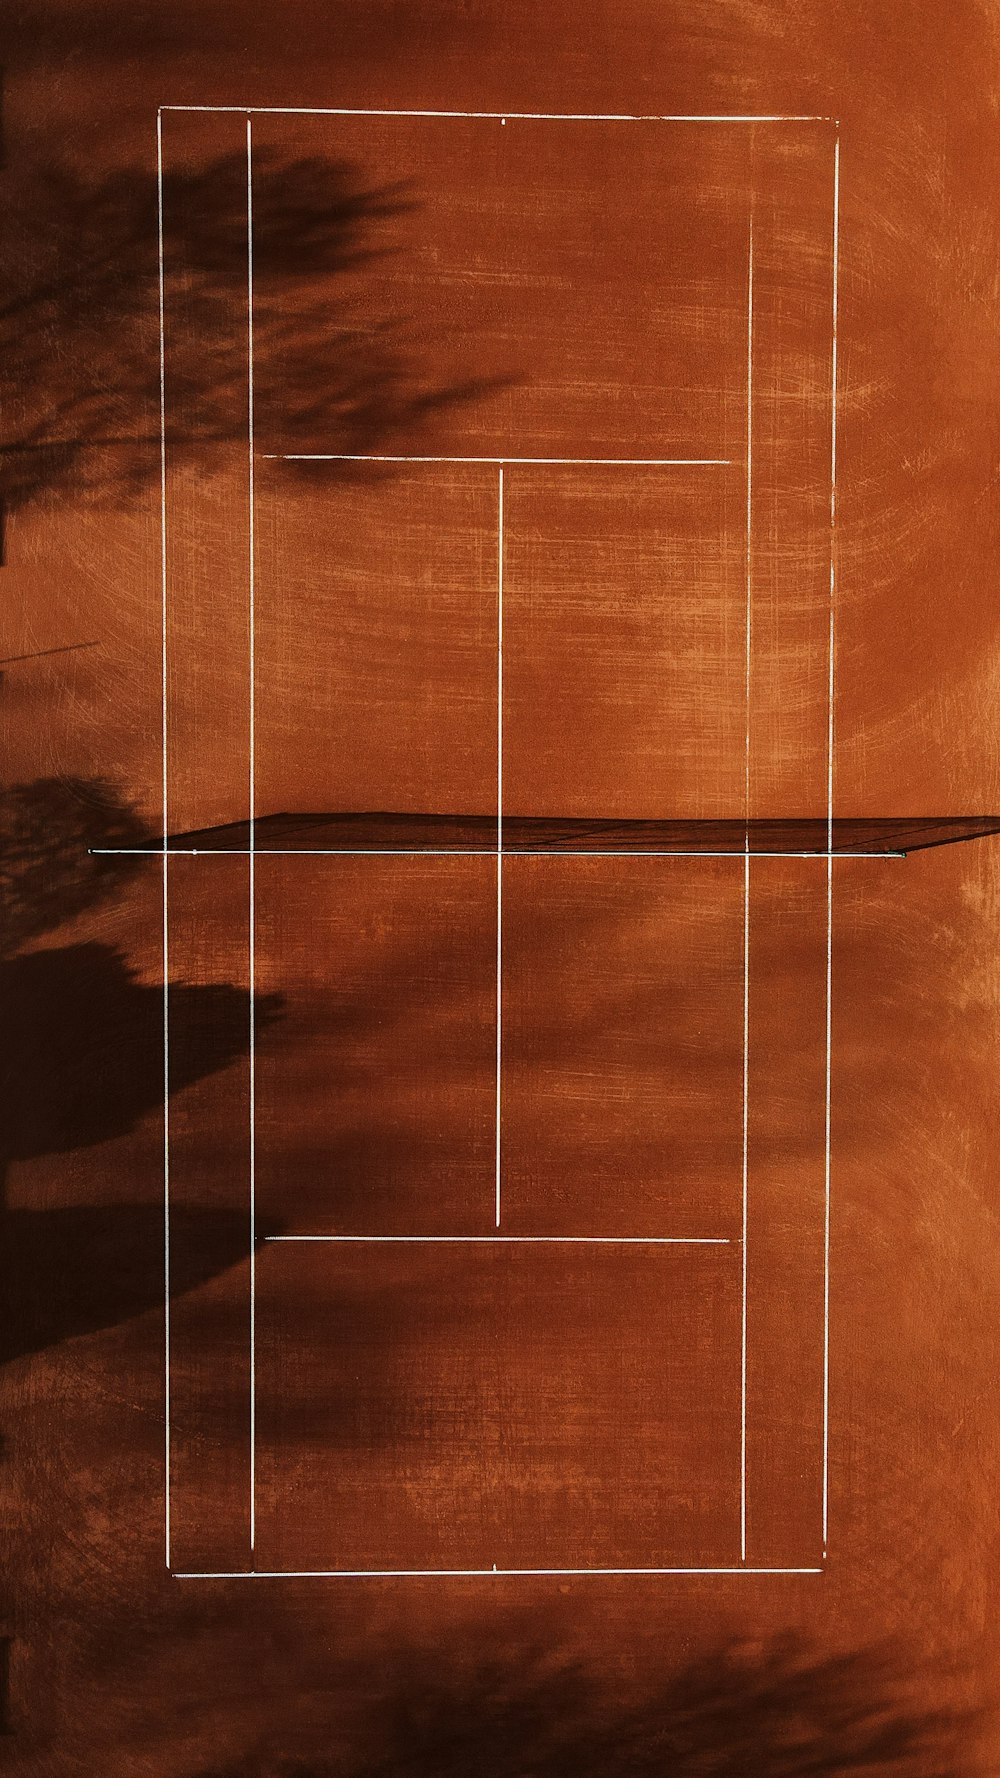 Tennis Court Pictures | Download Free Images on Unsplash